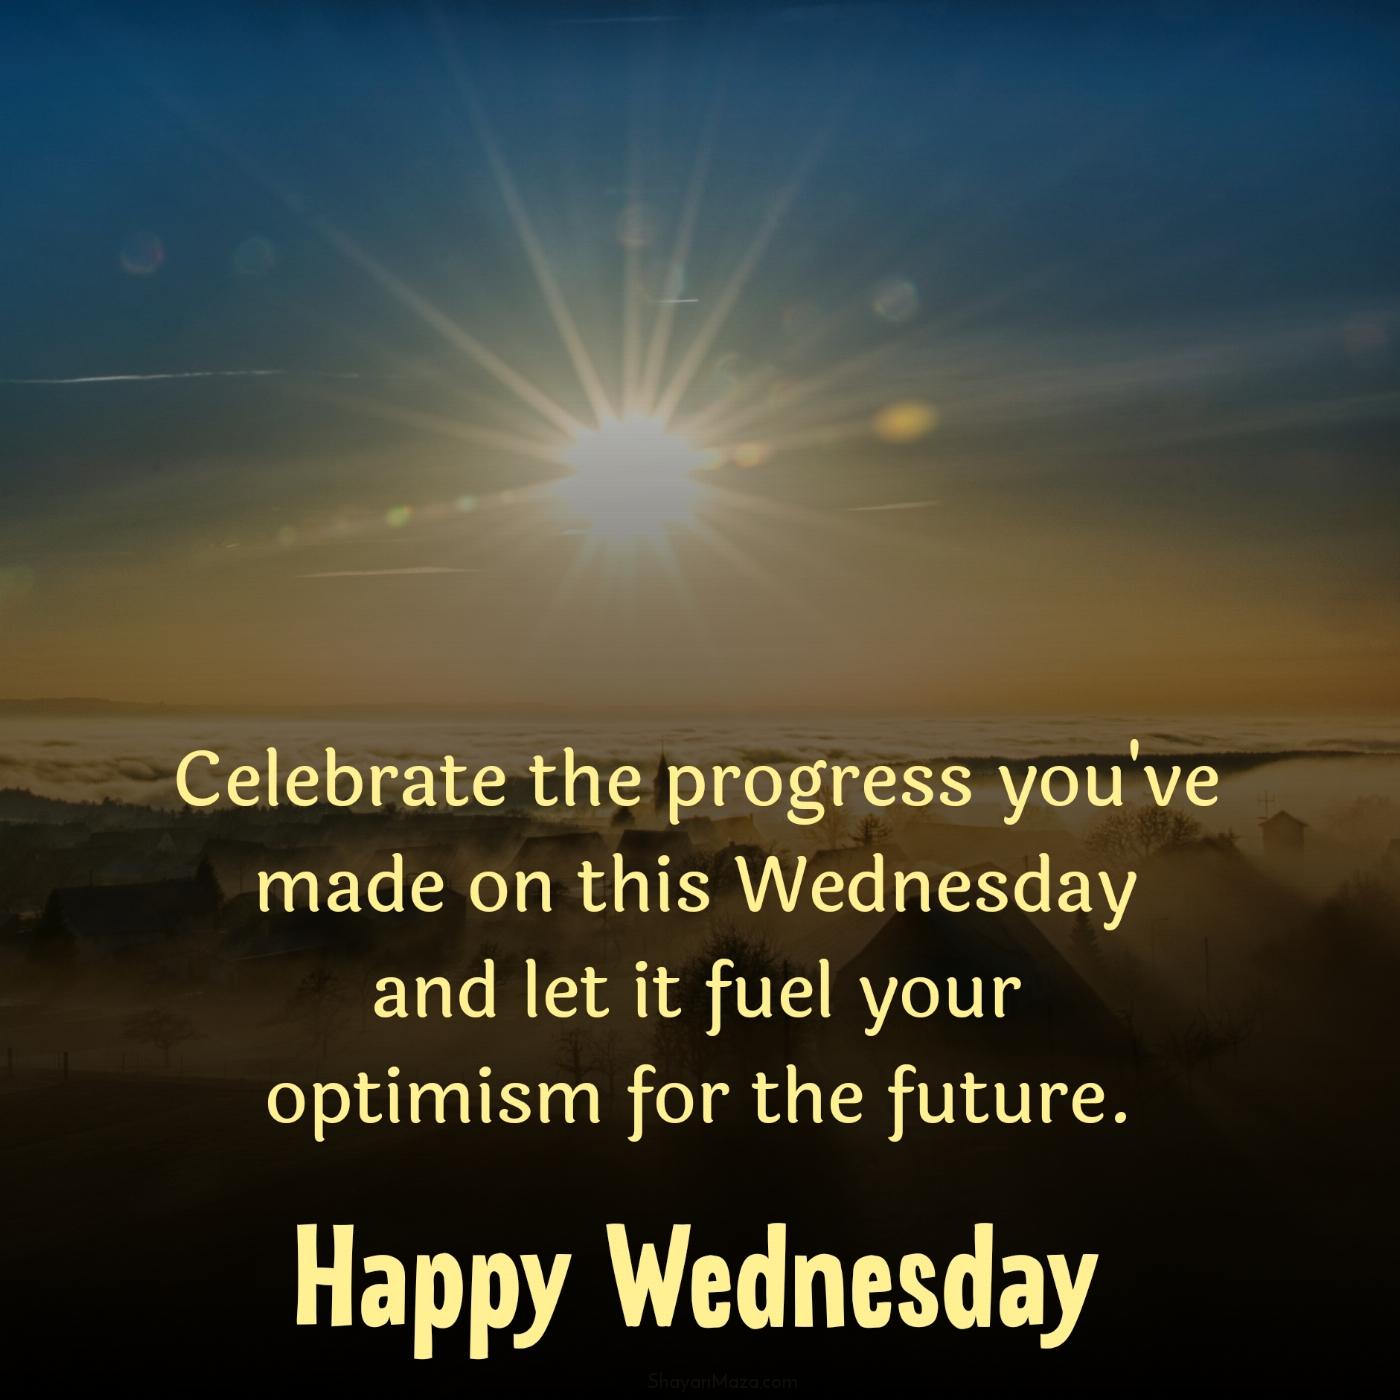 Celebrate the progress you've made on this Wednesday